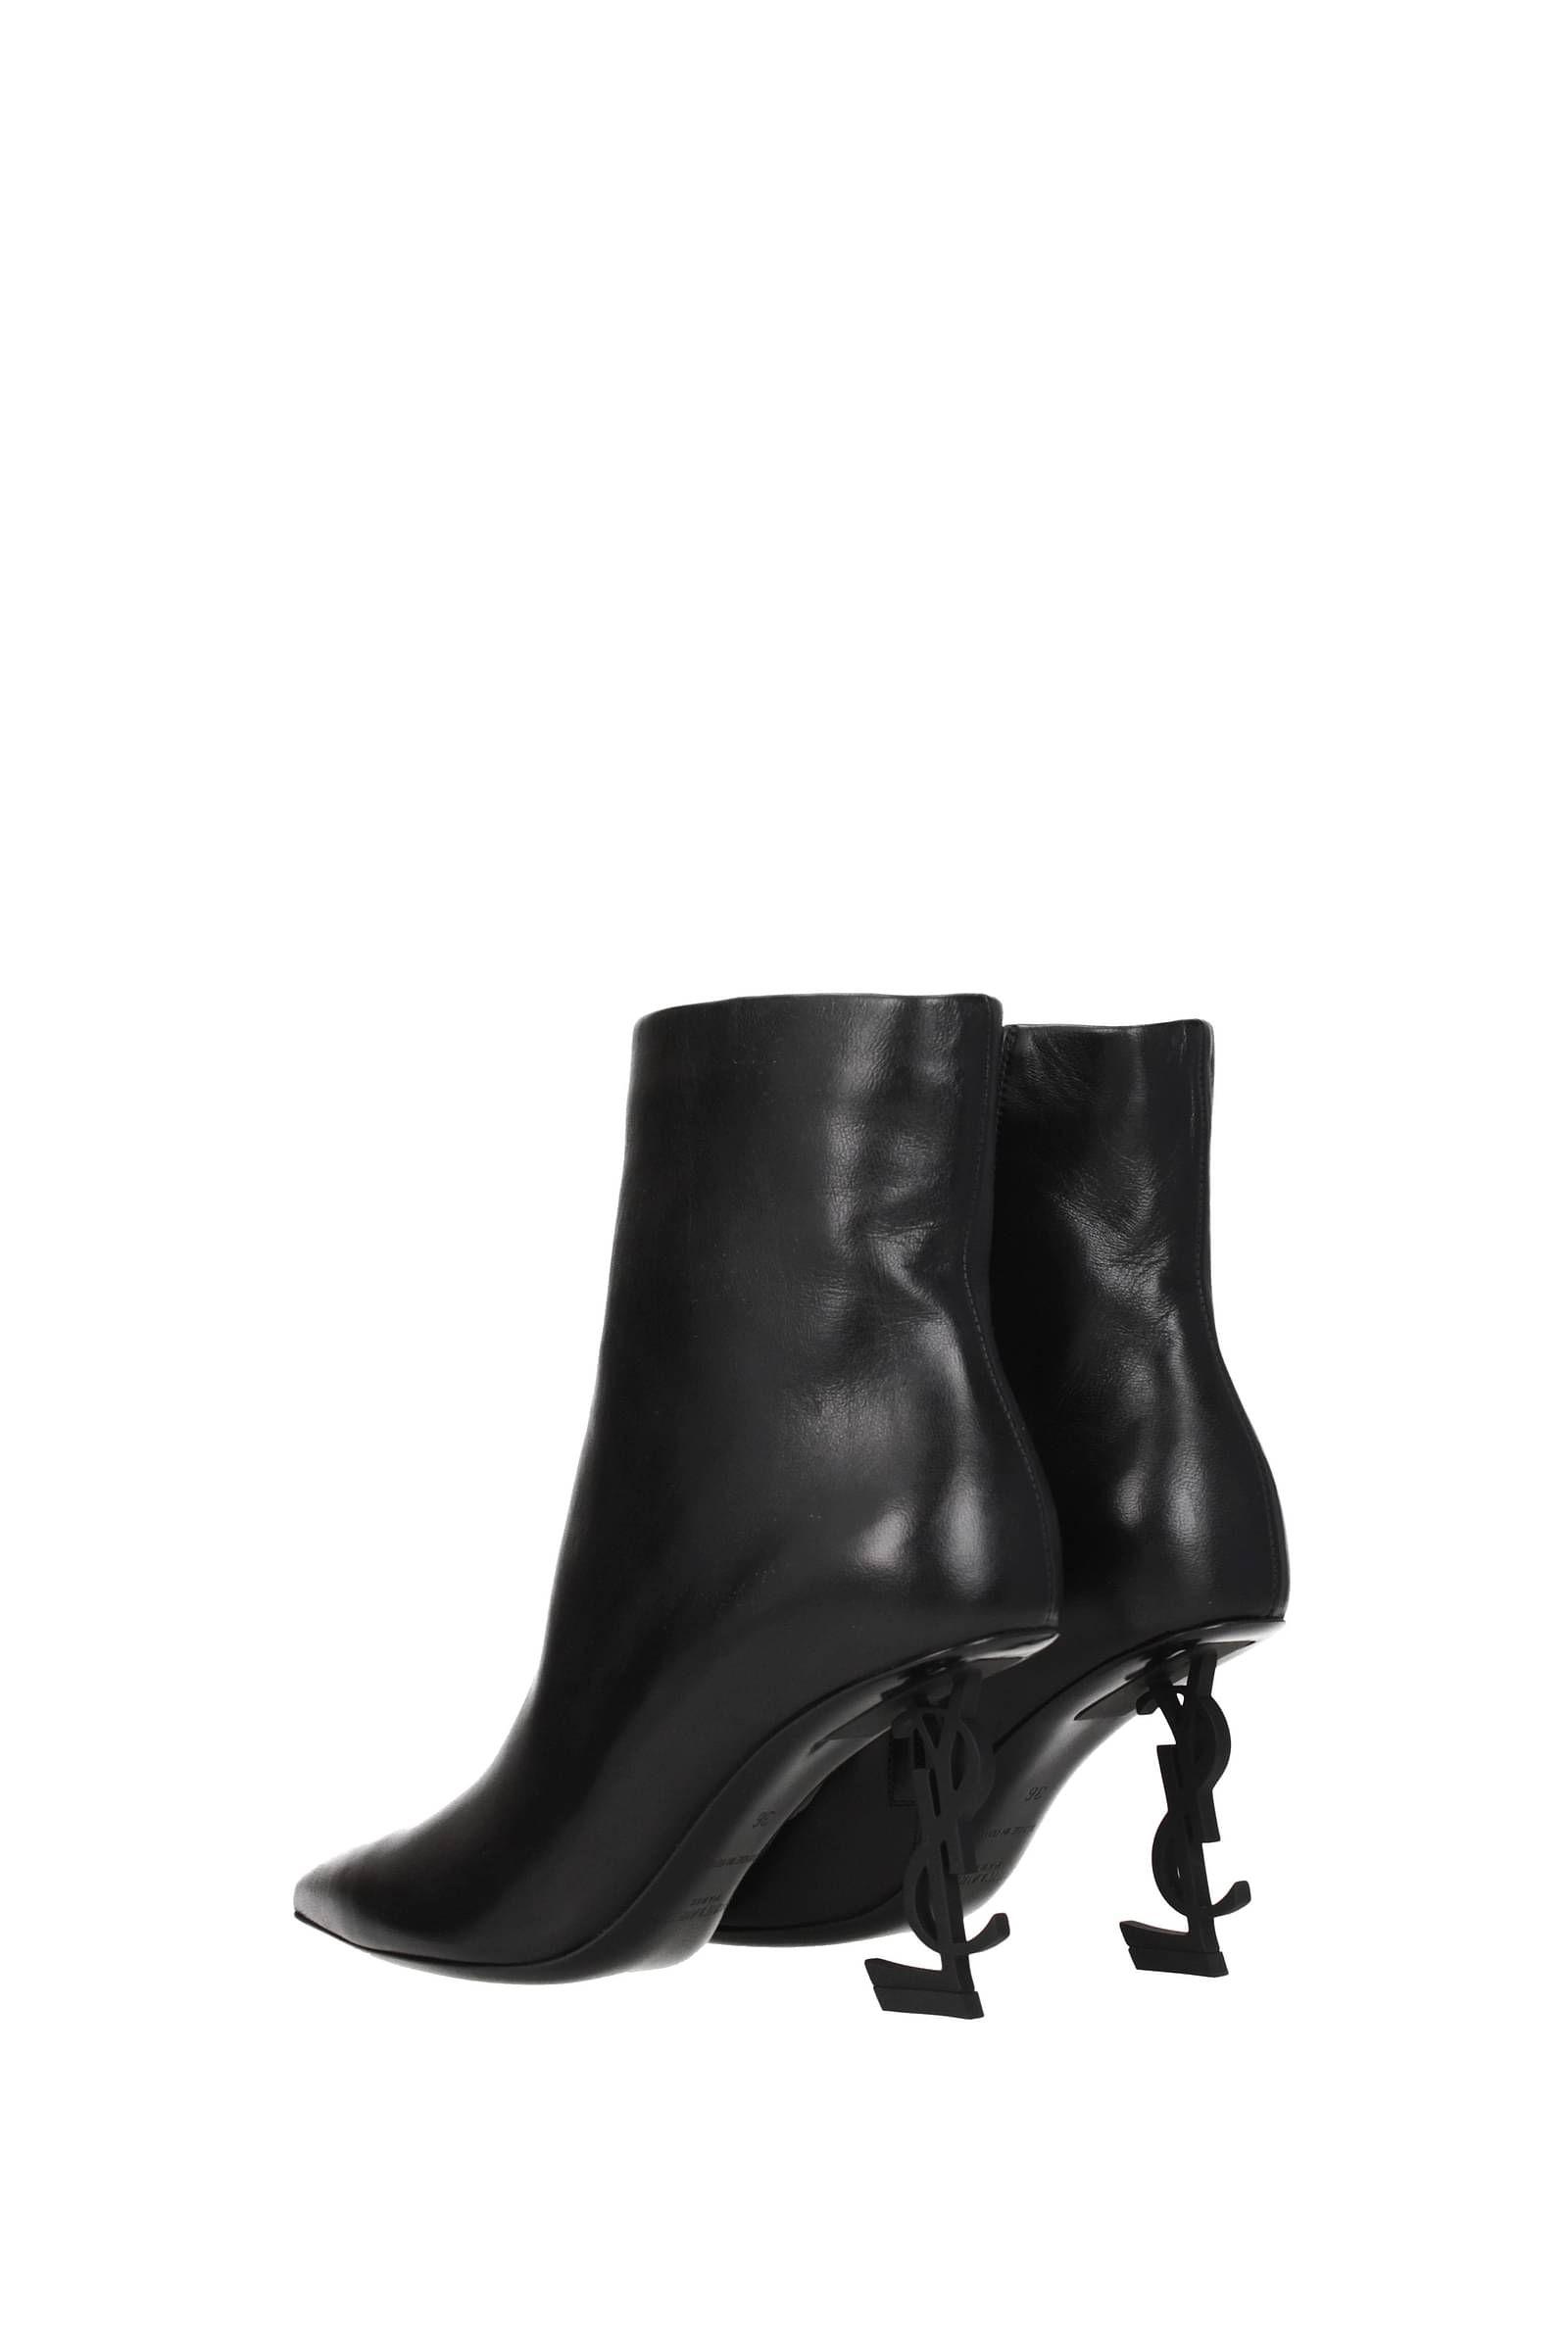 Saint Laurent Ankle Boots Opium Leather in Black | Lyst